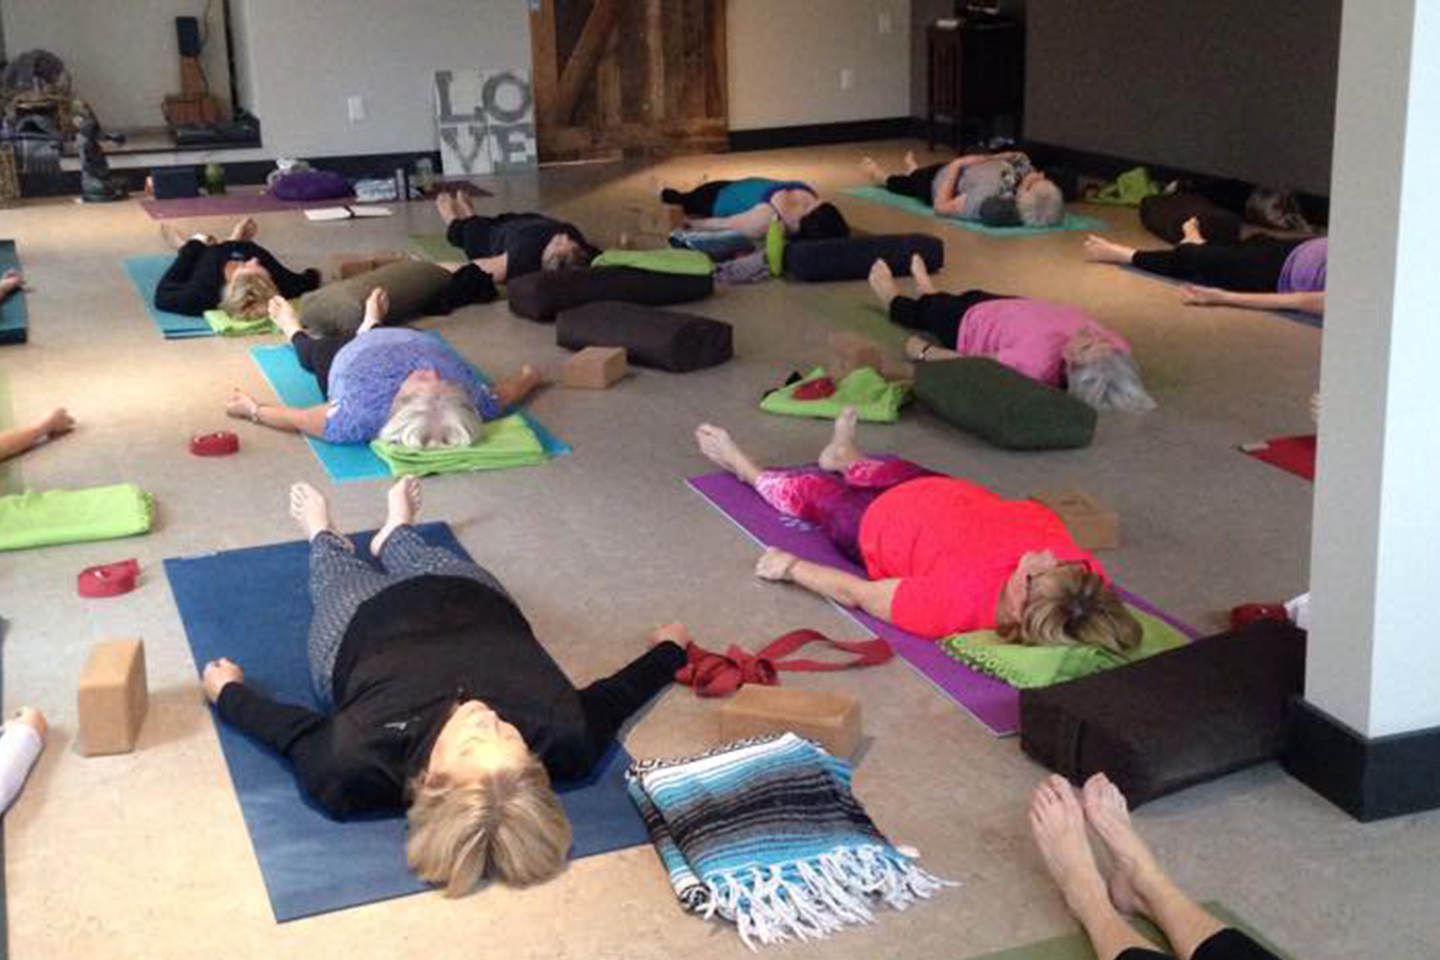 Women participating in a Yoga class, laying down in Savasana